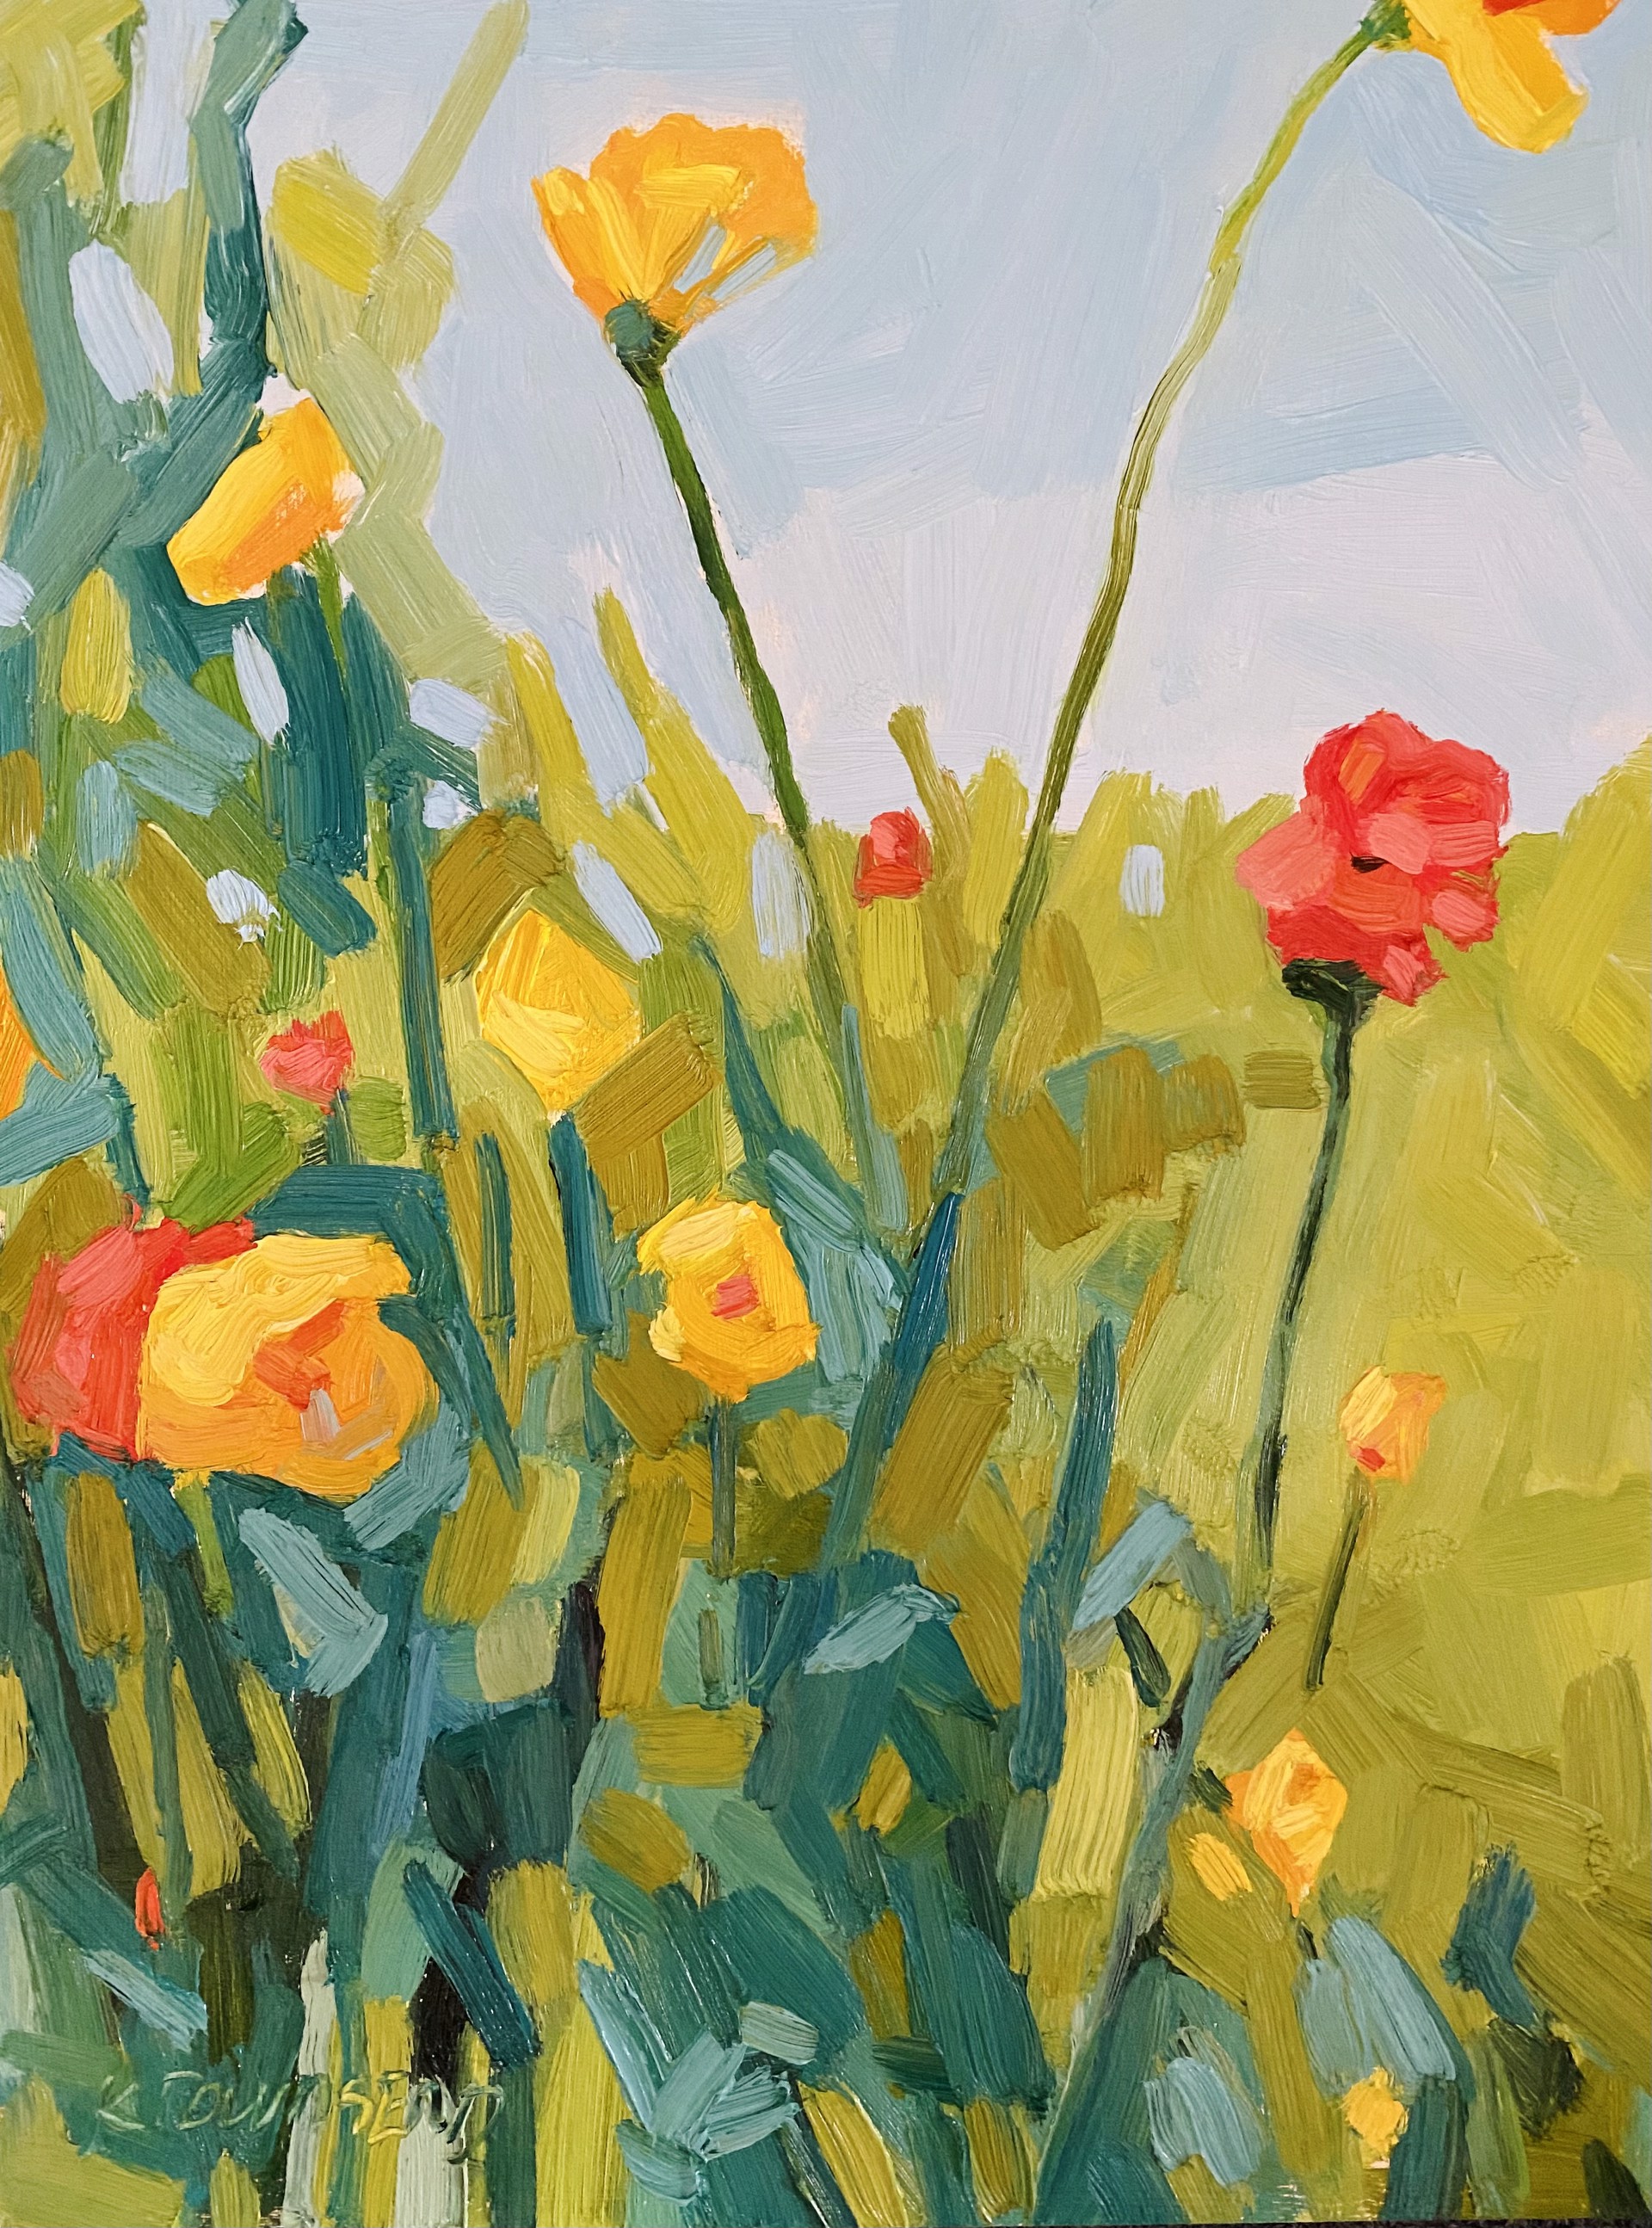 Poppies by Krista Townsend